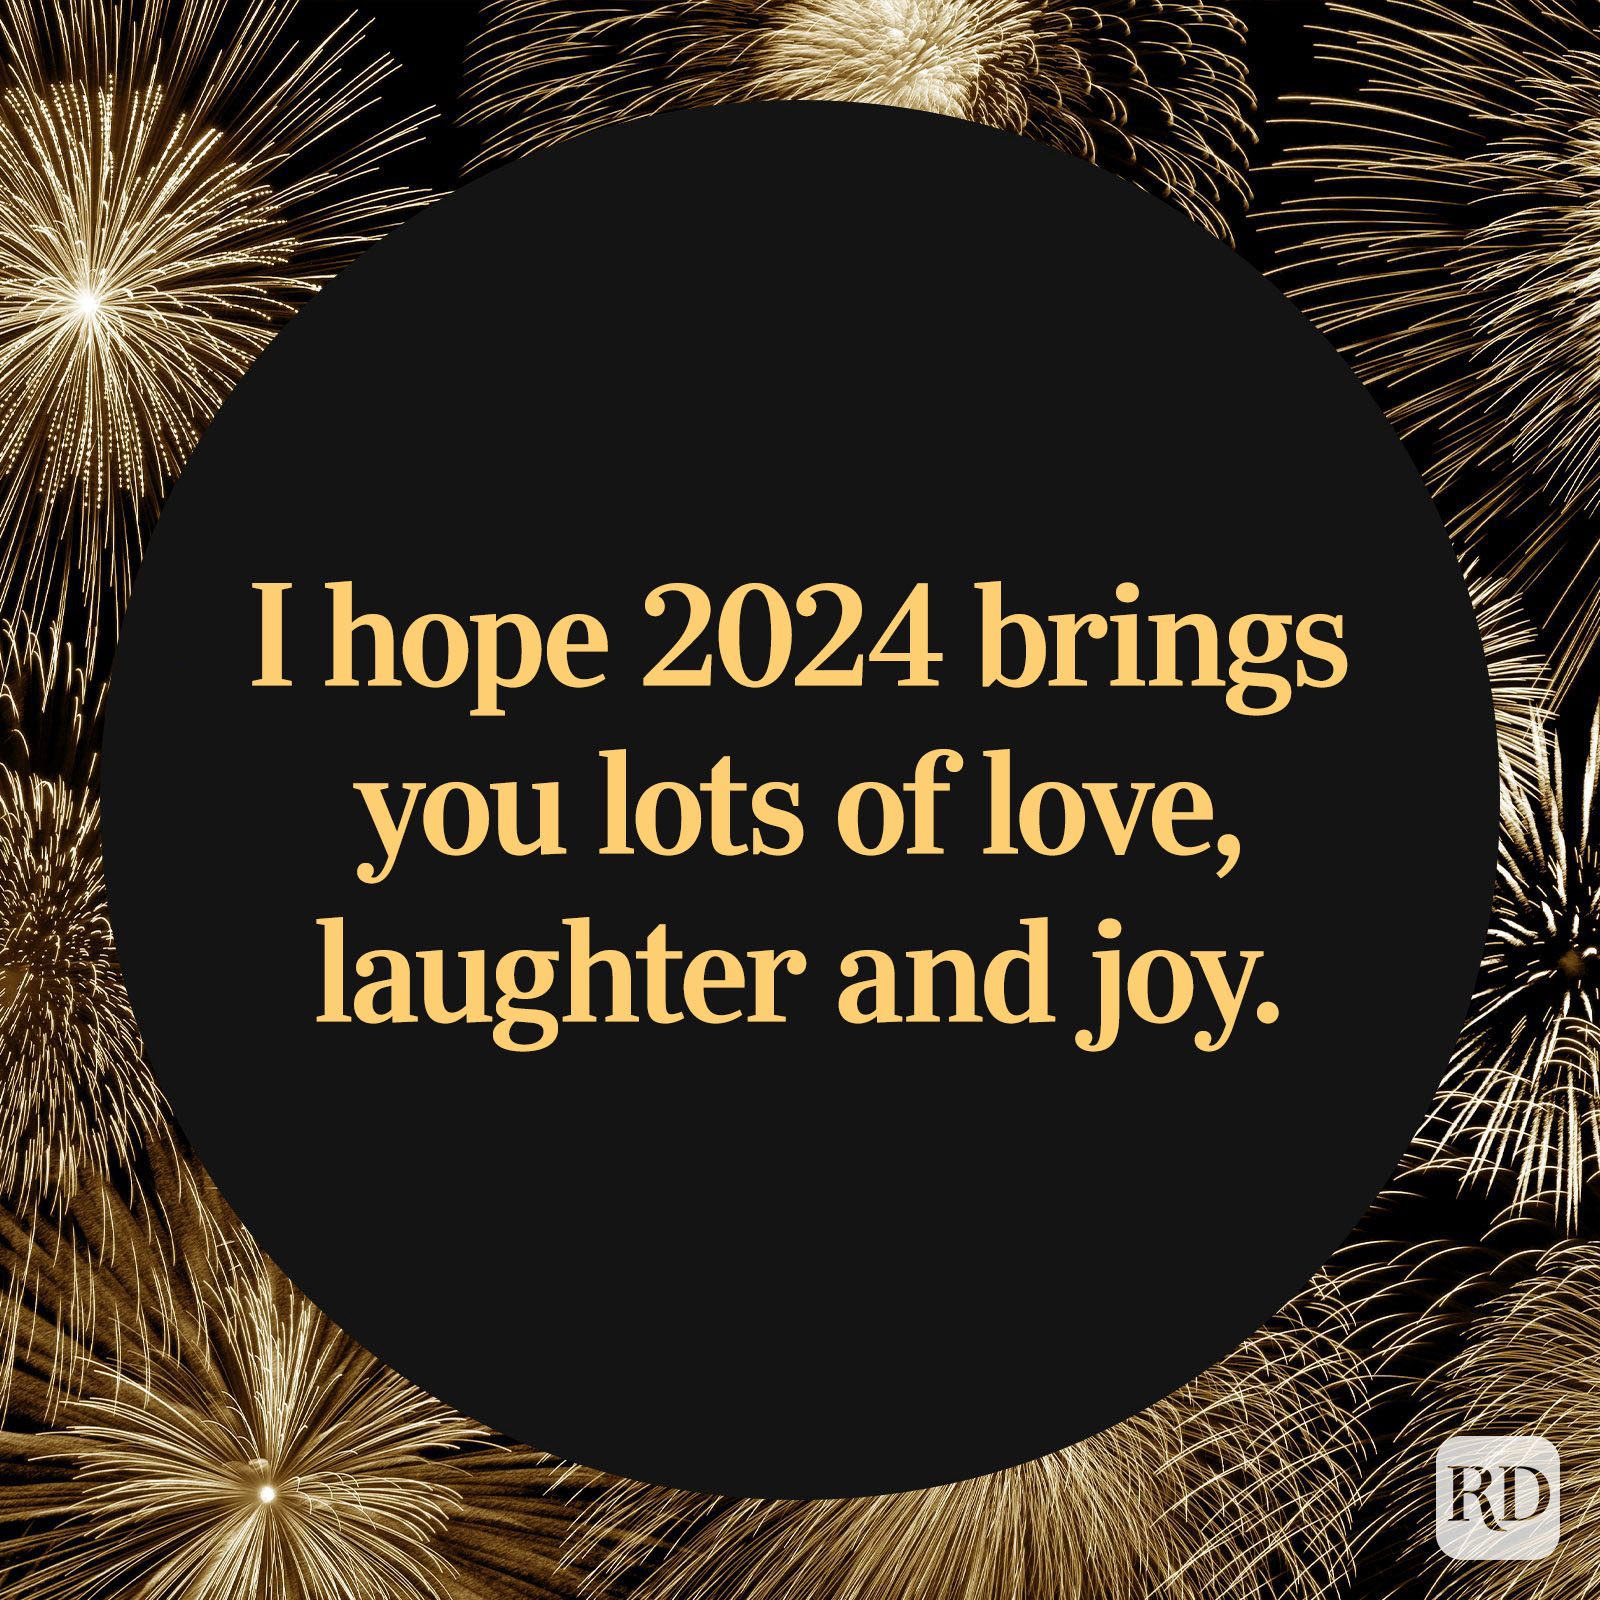 Happy New Year 2024 Wishes, Images and Videos  wishes for friends, happy new  year, new year wishes